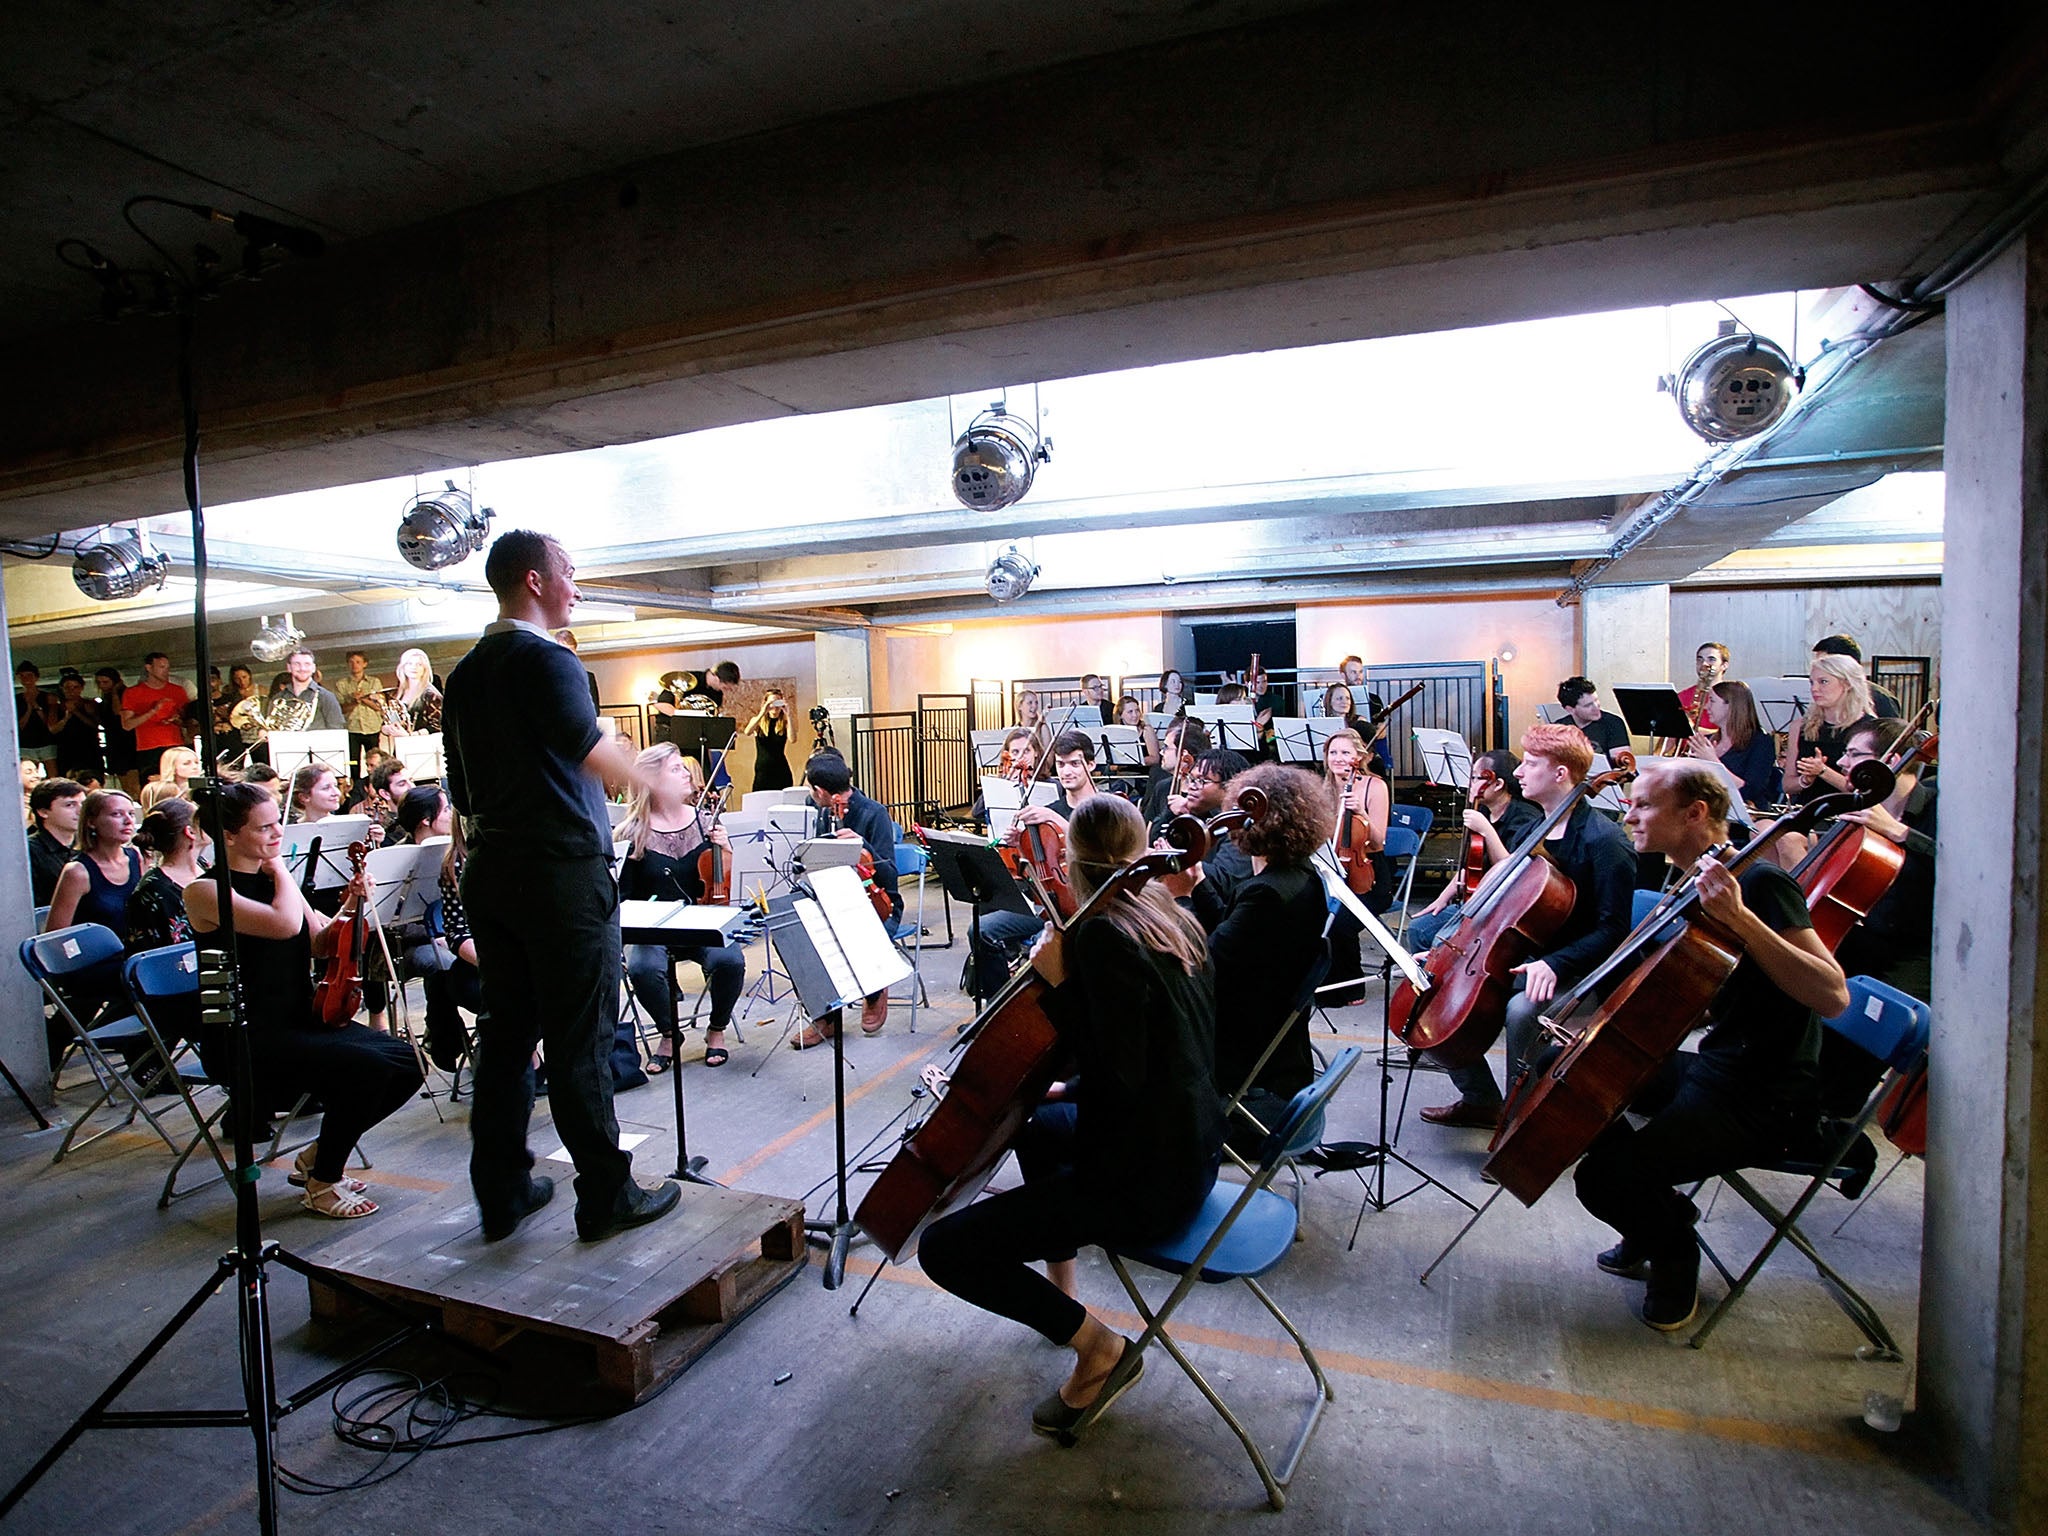 Christopher Stark conducts The Multi-Story Orchestra as they perform Jean Sibelius' 5th Symphony at the Peckham Rye Car Park on June 21, 2014 in London, England. The performance is one of a series that the orchestra will be performing in the South London